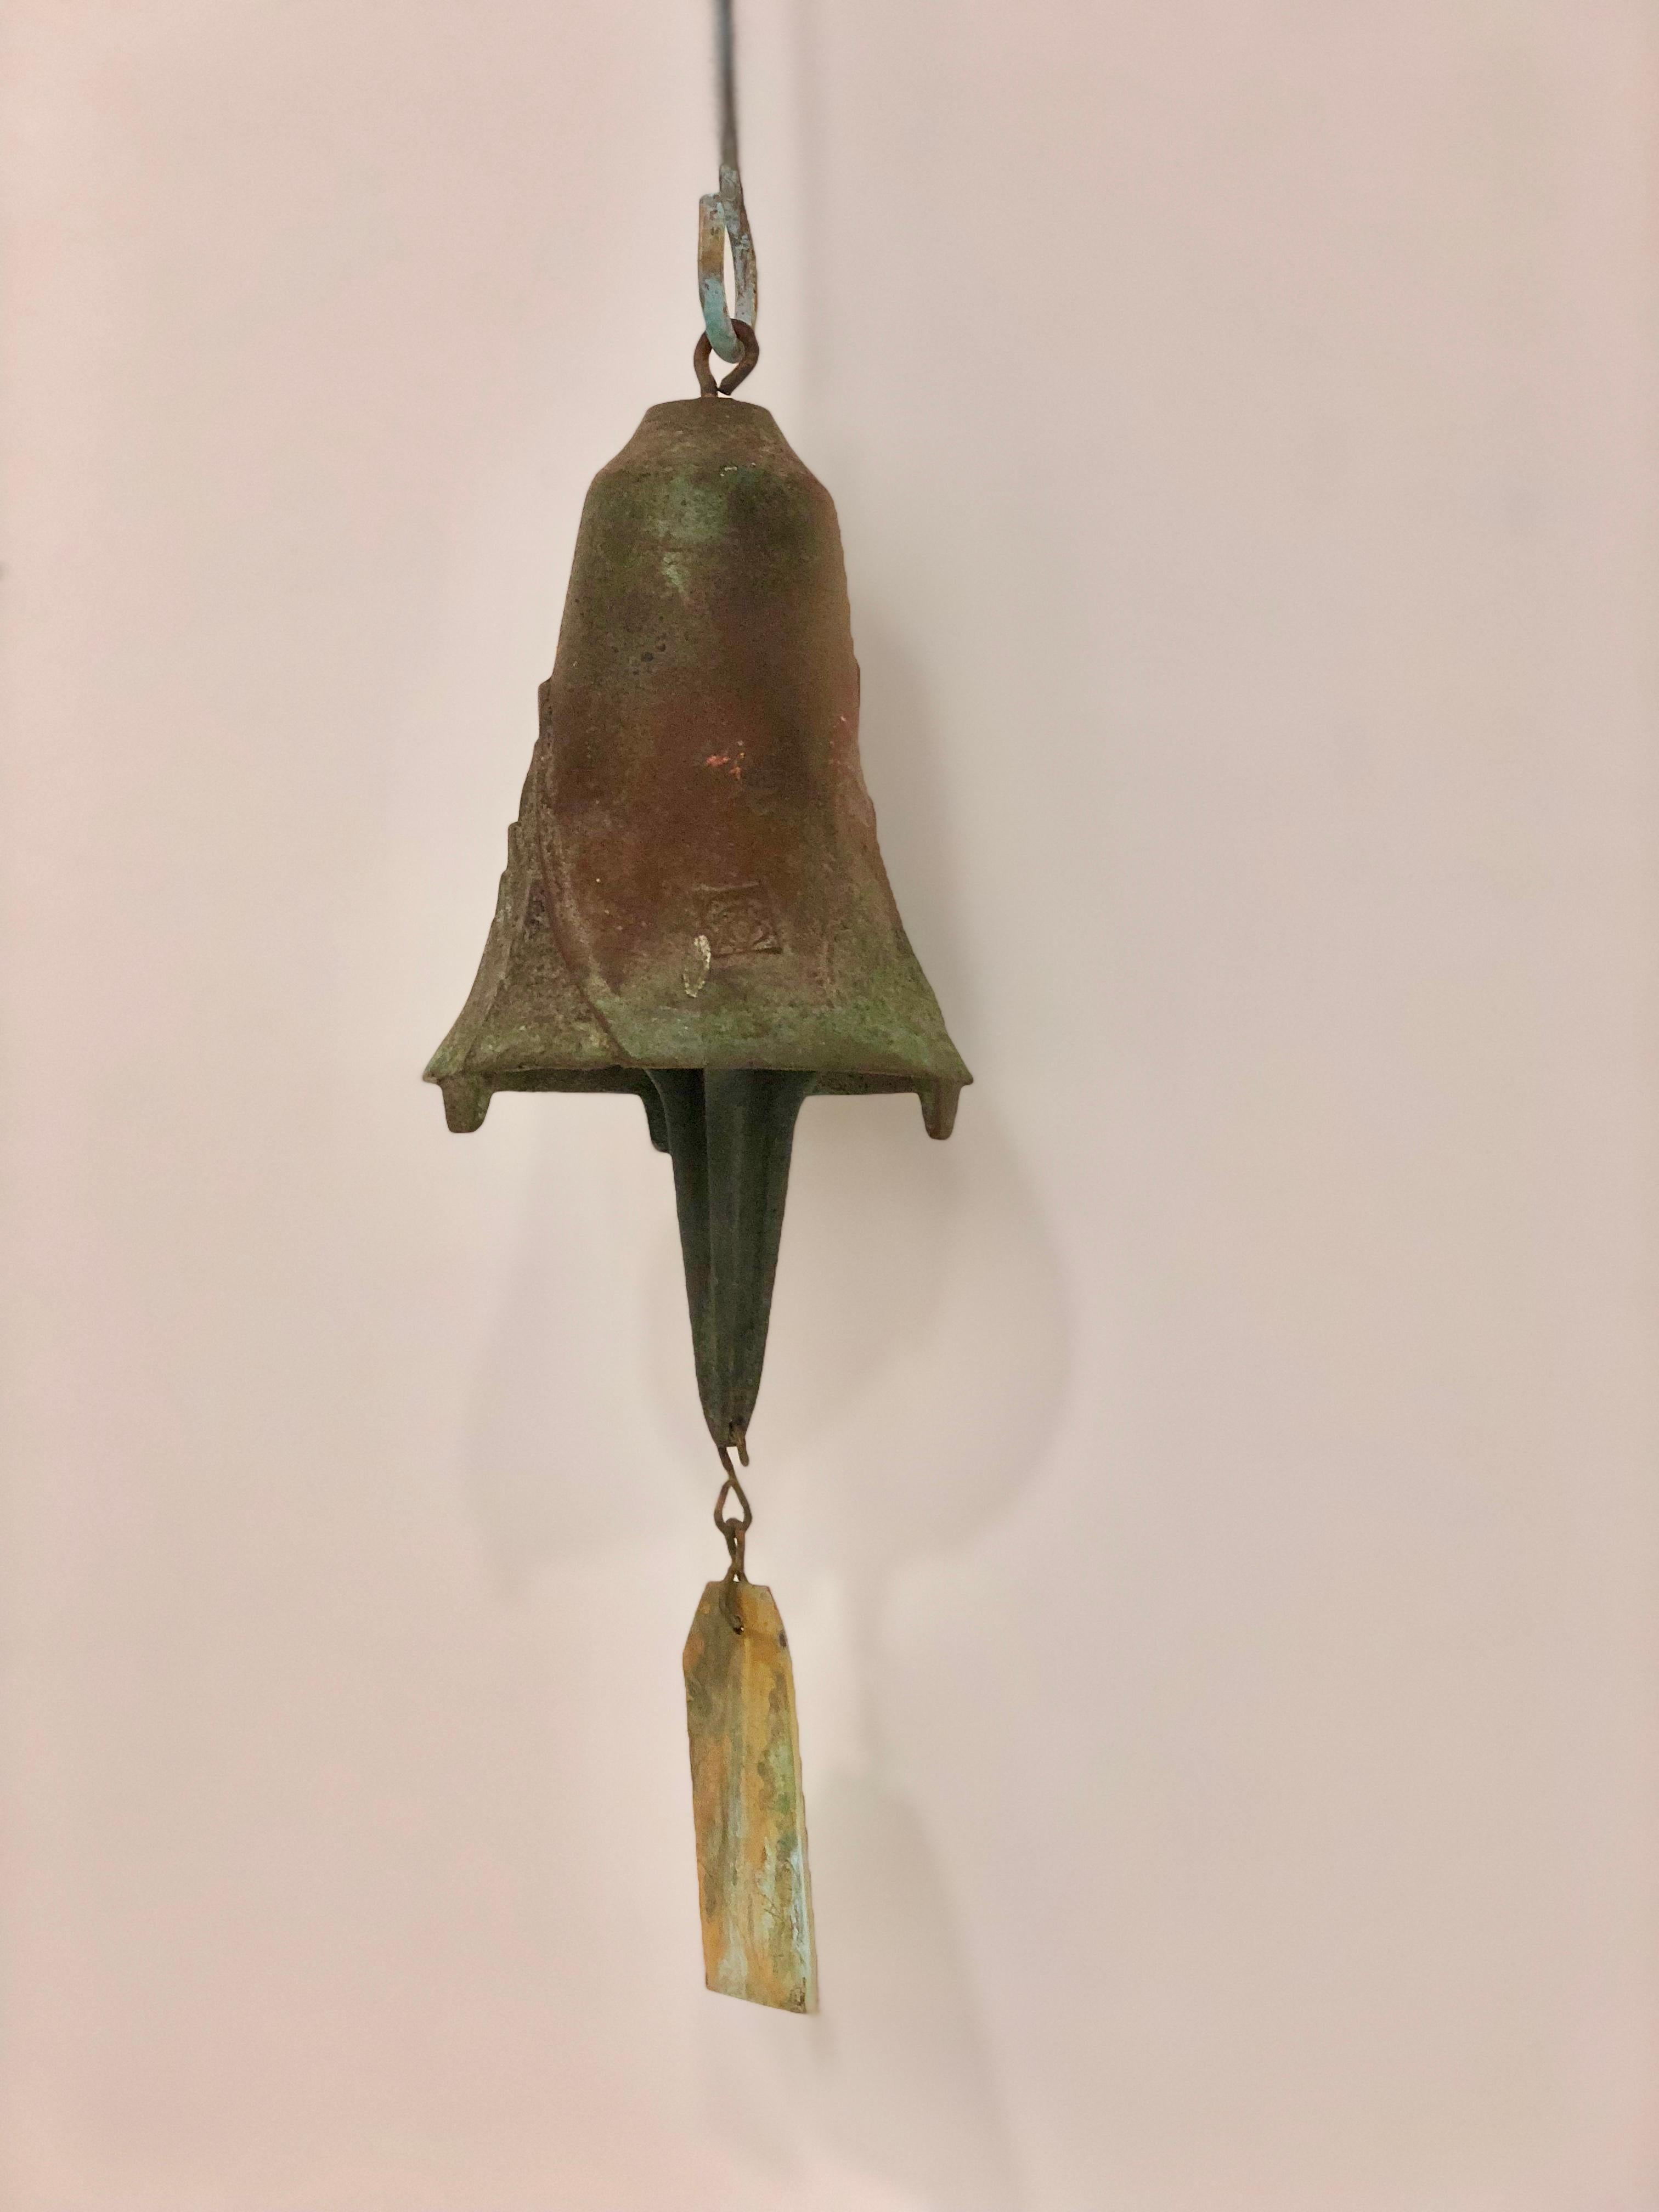 American Bronze Bell by Paolo Soleri